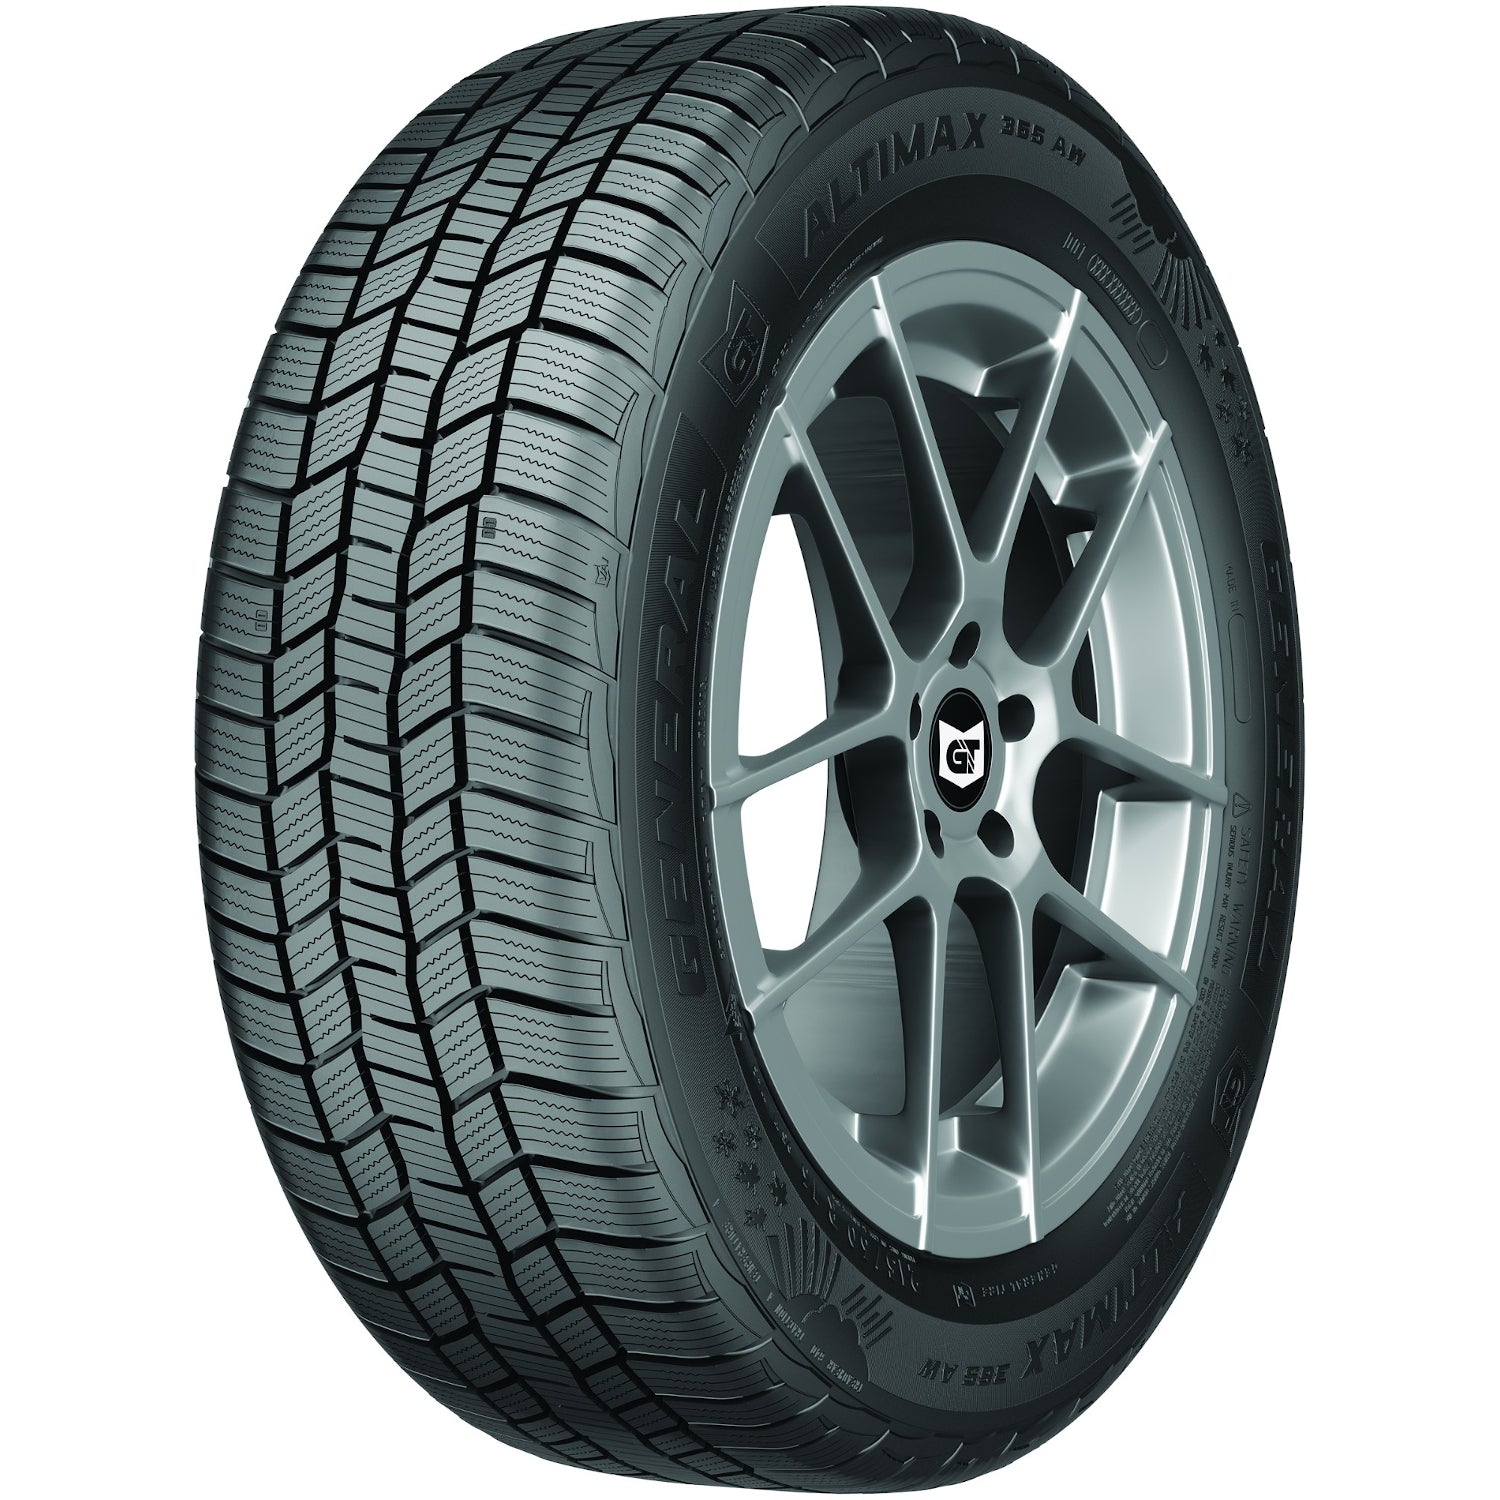 GENERAL ALTIMAX 365AW 235/55R19 (29.2X9.3R 19) Tires